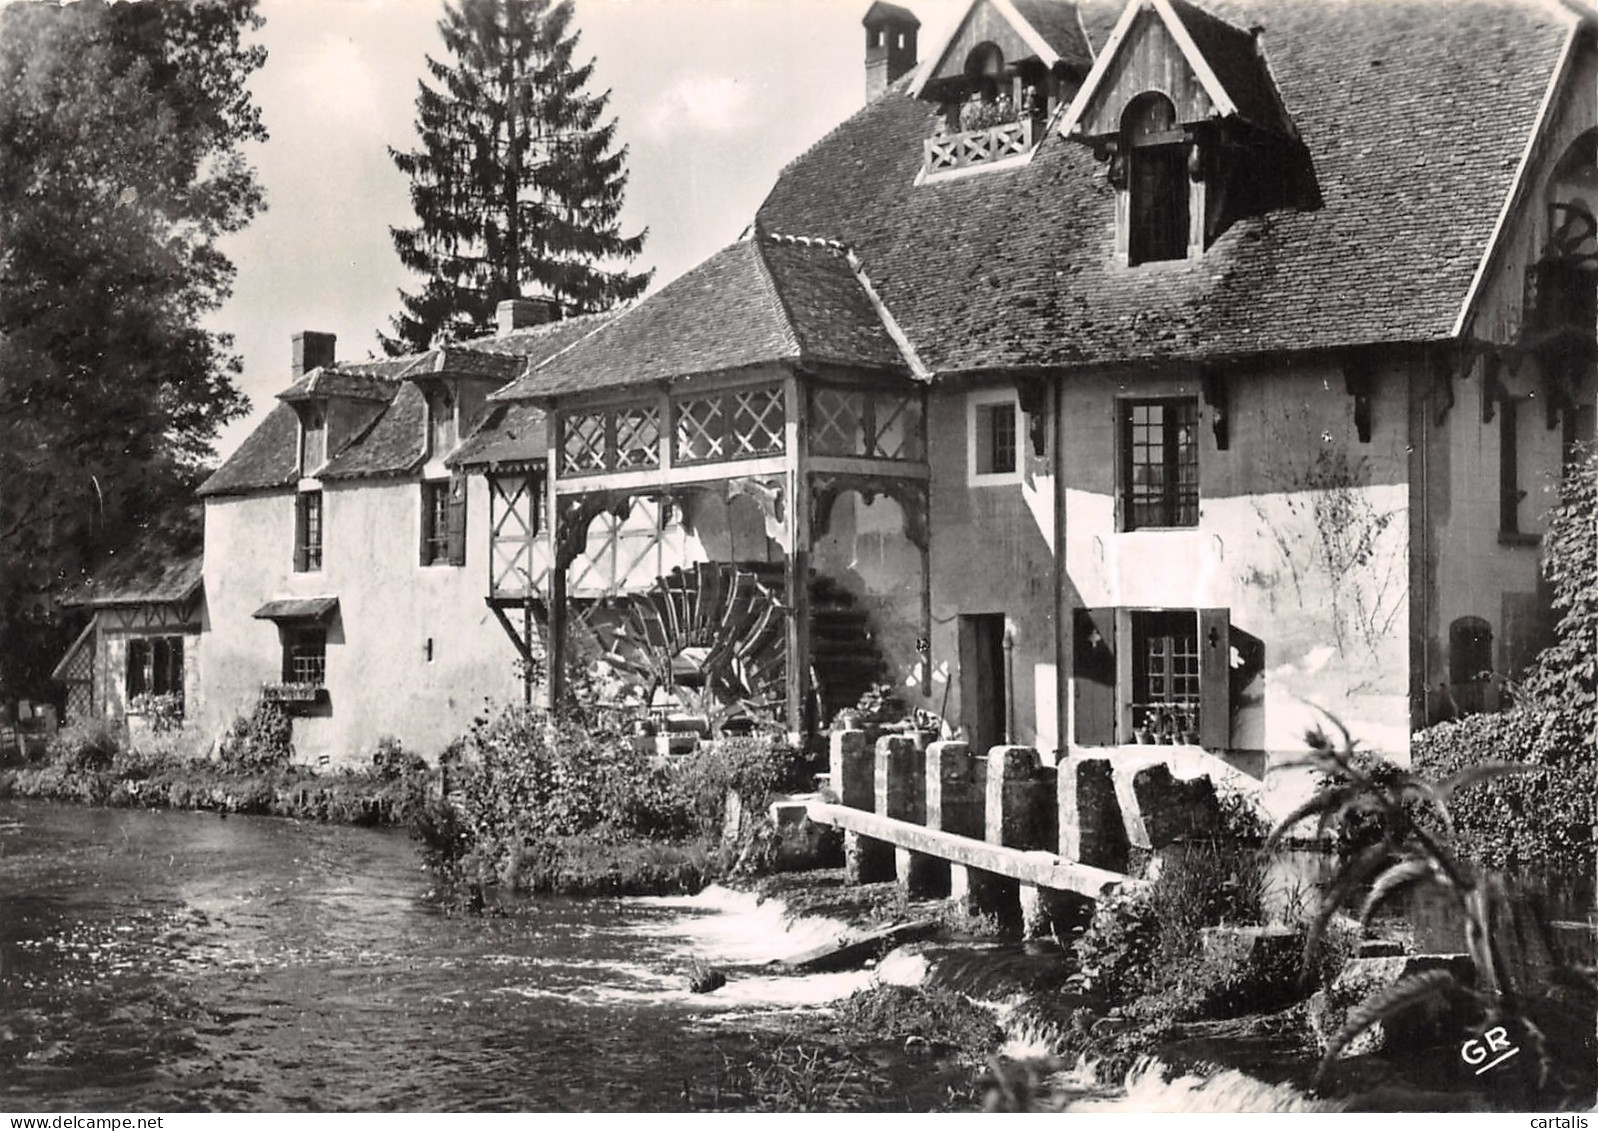 27-FOURGES-AUBERGE DU MOULIN-N 588-D/0221 - Fourges